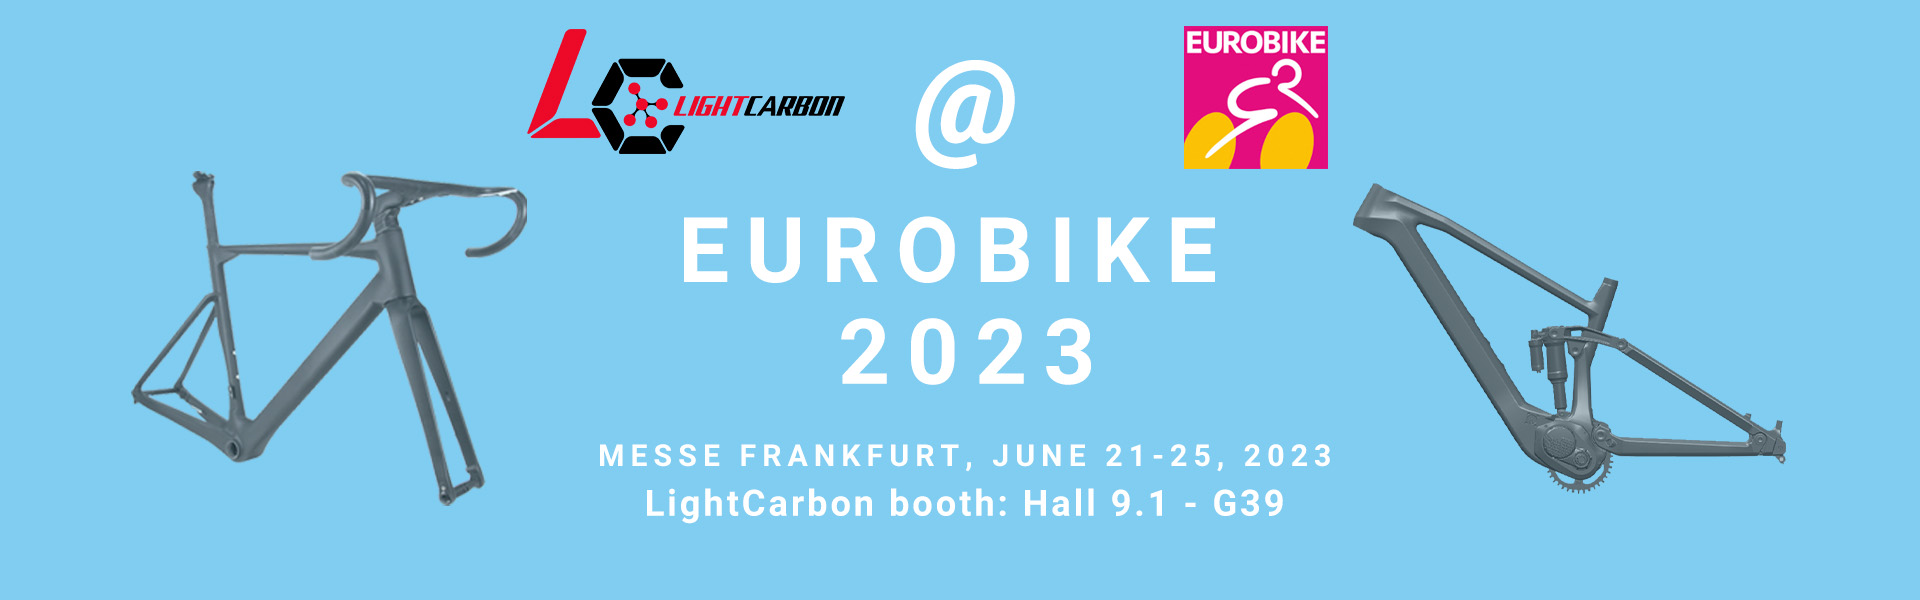 LightCarbon 2023 Eurobike booth